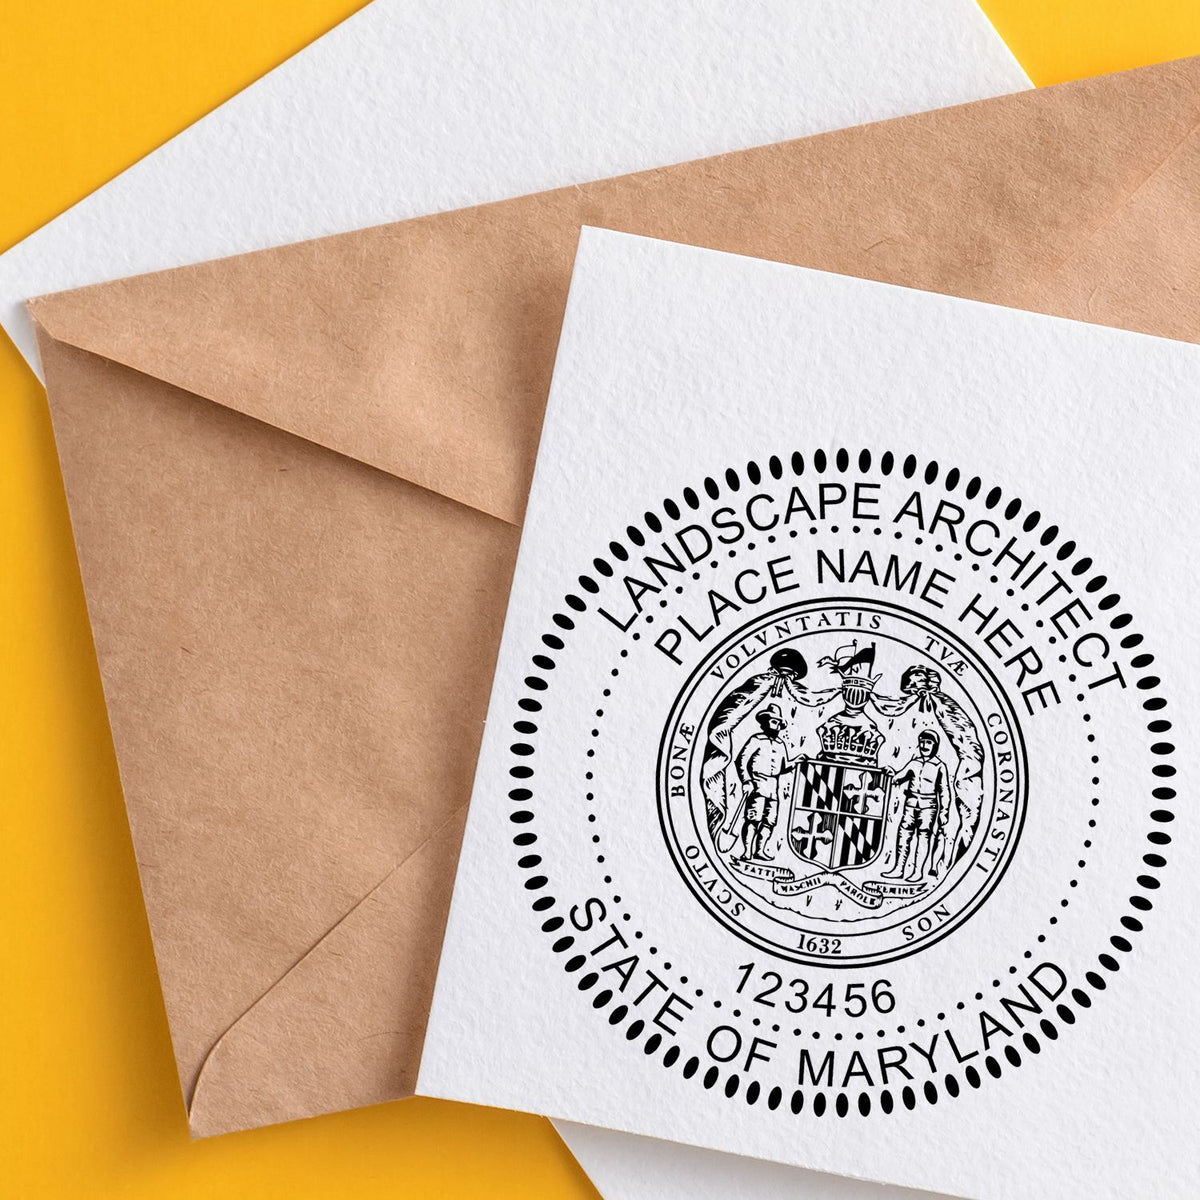 This paper is stamped with a sample imprint of the Premium MaxLight Pre-Inked Maryland Landscape Architects Stamp, signifying its quality and reliability.